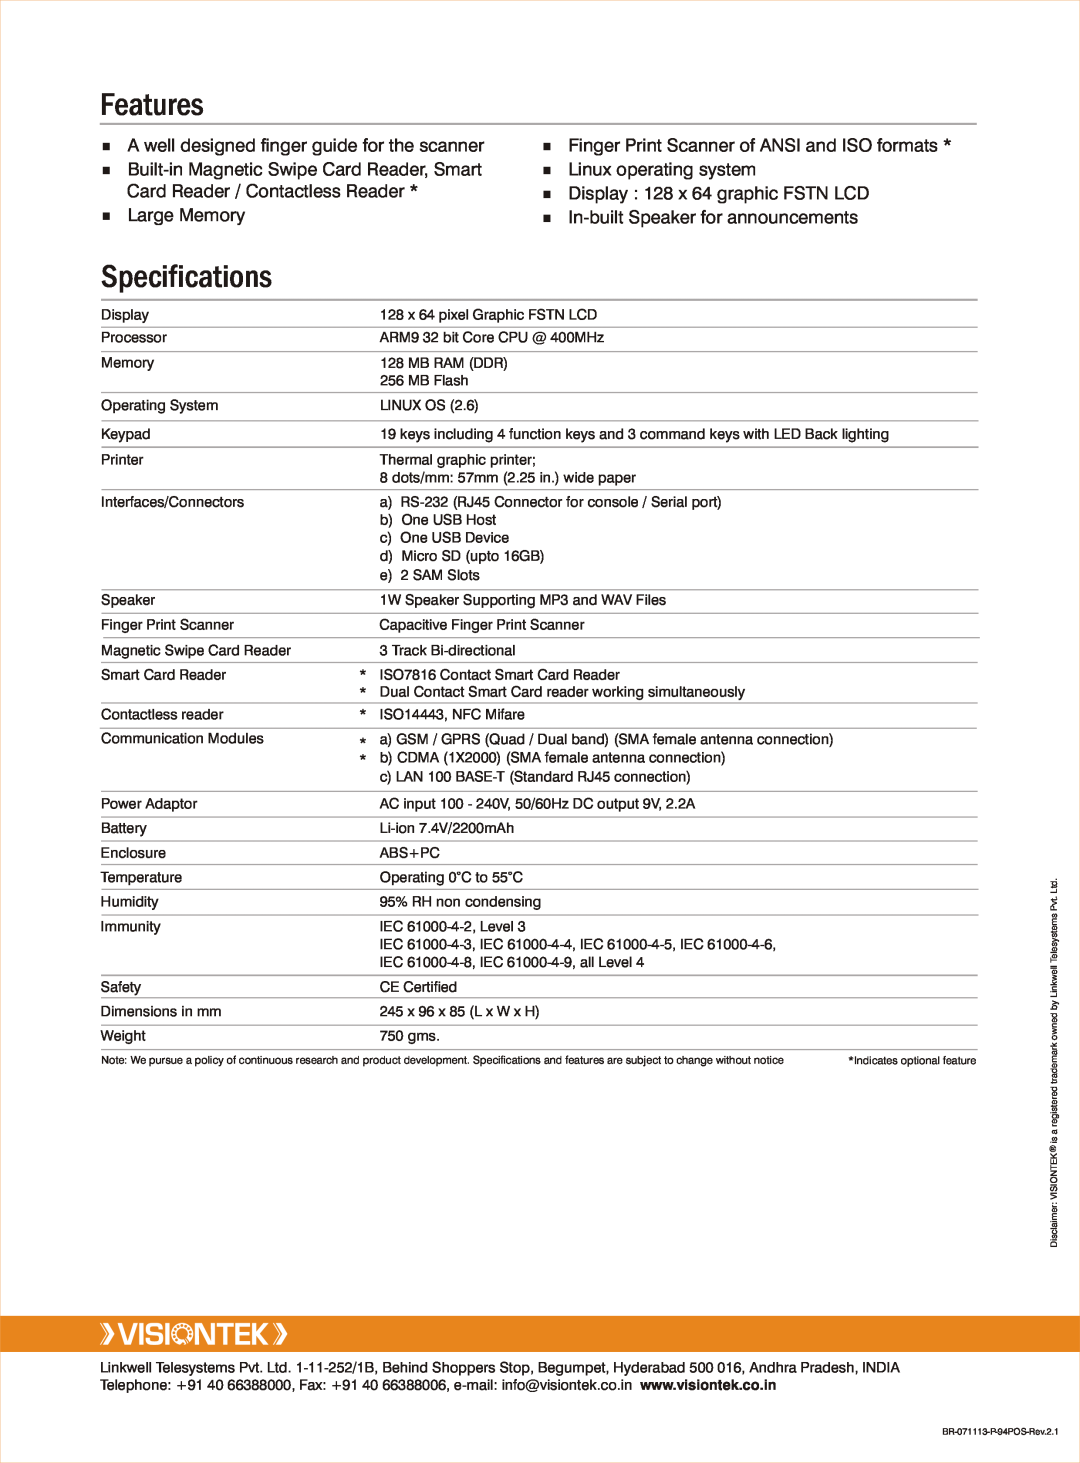 VisionTek ISO 7811 manual Features, Specifications, ¾A well designed finger guide for the scanner, ¾Linux operating system 